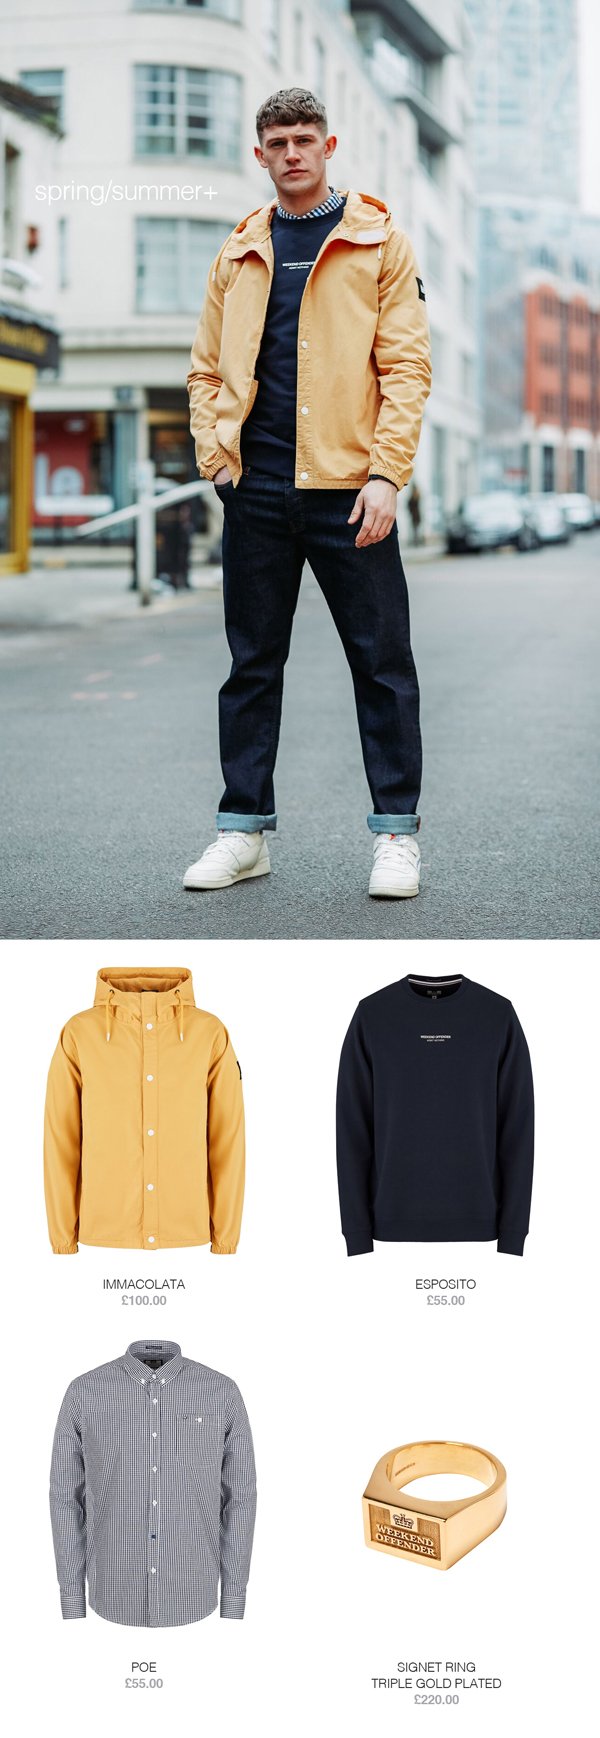 Kracht Artefact avond Weekend Offender: SS/19 Focus: 'IMMACOLATA' | Style with our 'ESPOSITO'  sweat, 'POE' shirt and SIGNET RING to complete the look ☟ | Milled